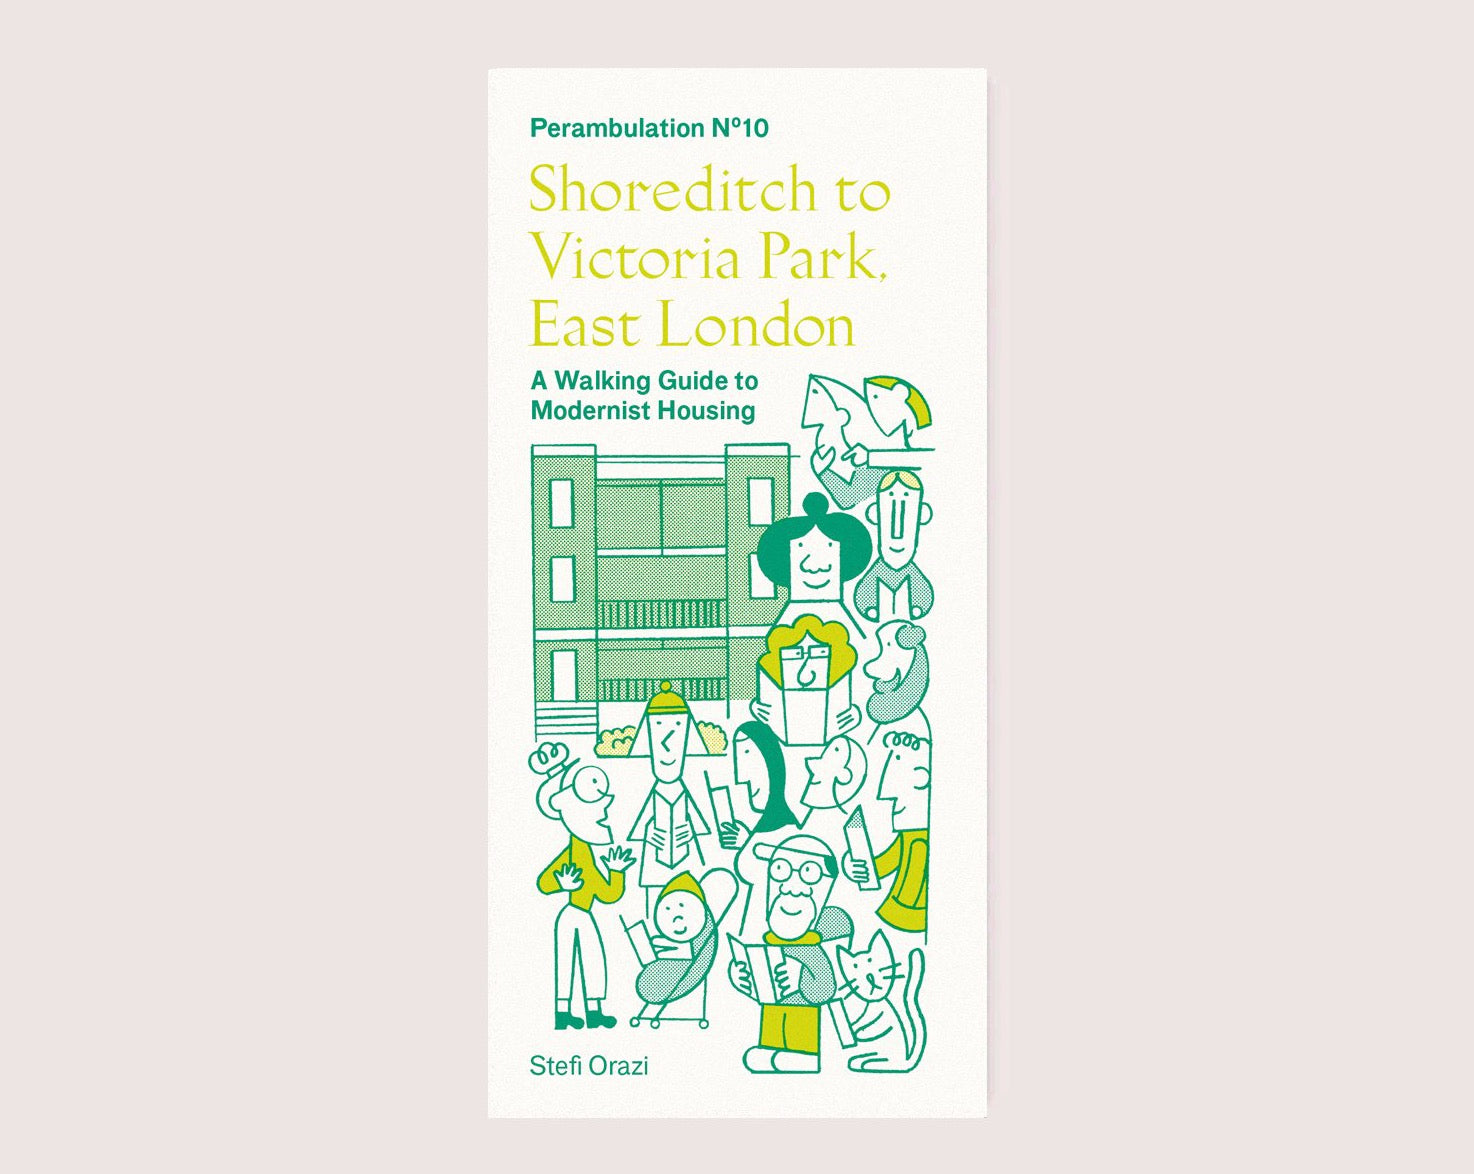 Perambulation Nº10—A Walking Guide to Modernist Housing in Shoreditch to Victoria Park, East London